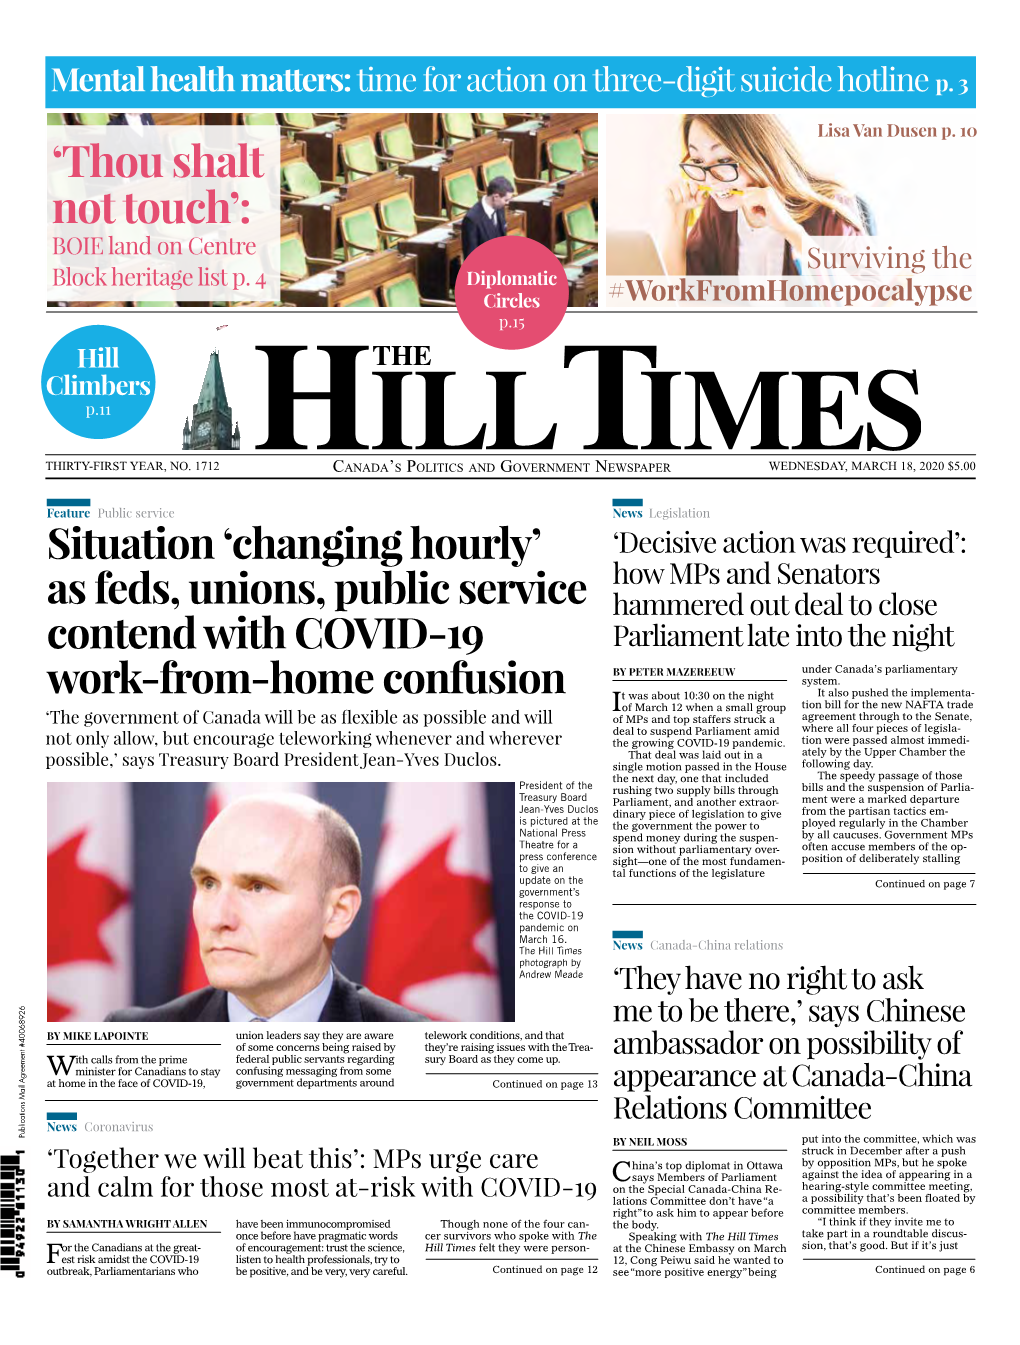 PDF Version of the Hill Times